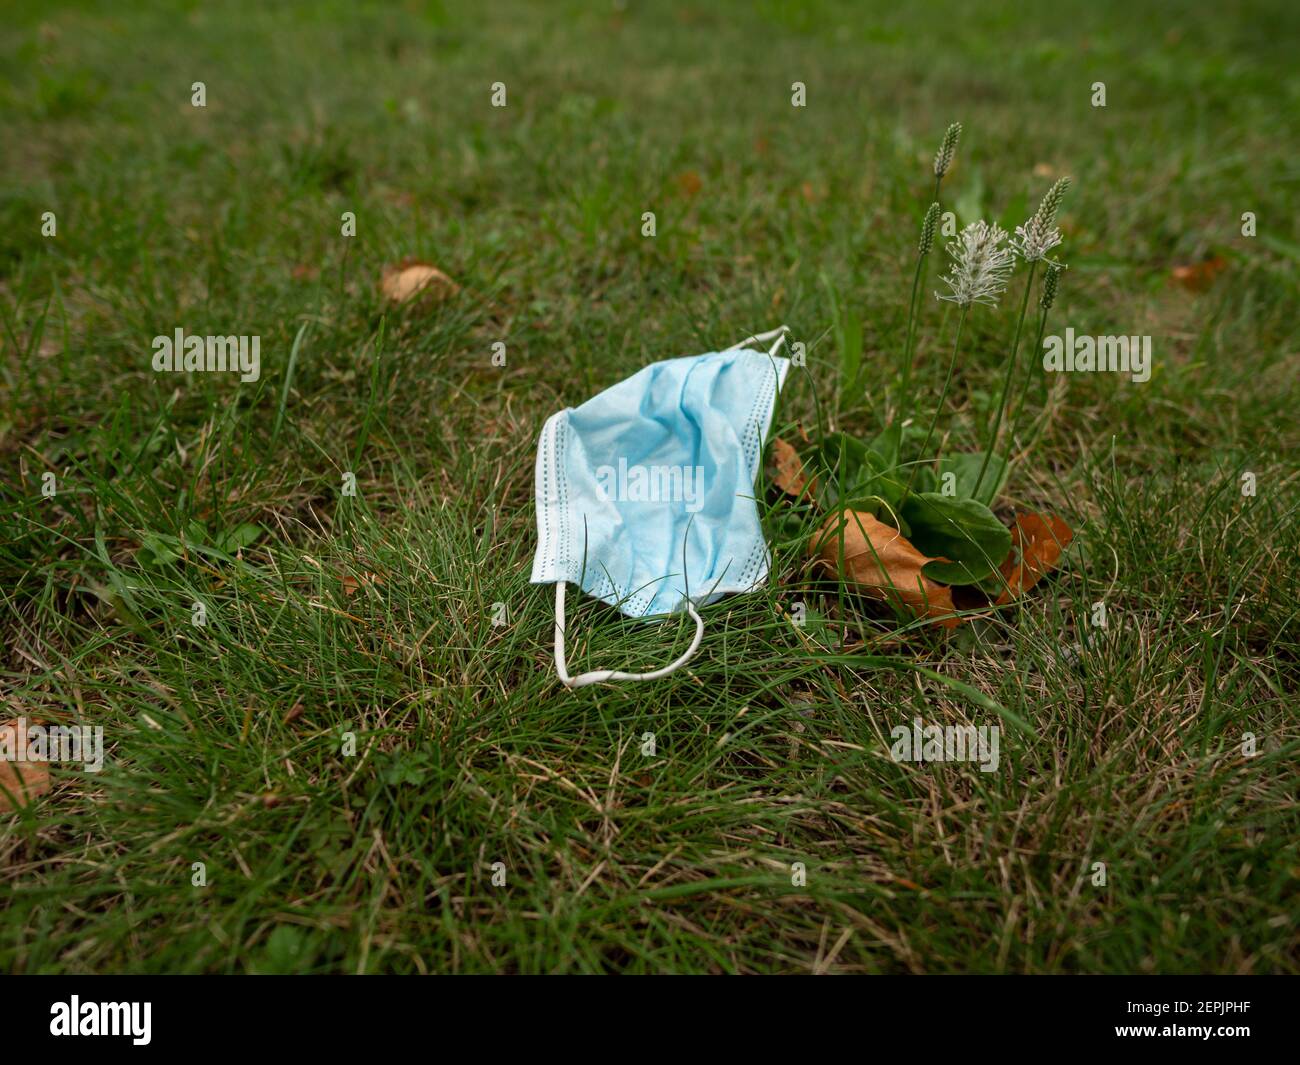 Used face mask on green grass as environmental pollution in a public park plastic waste junk Stock Photo